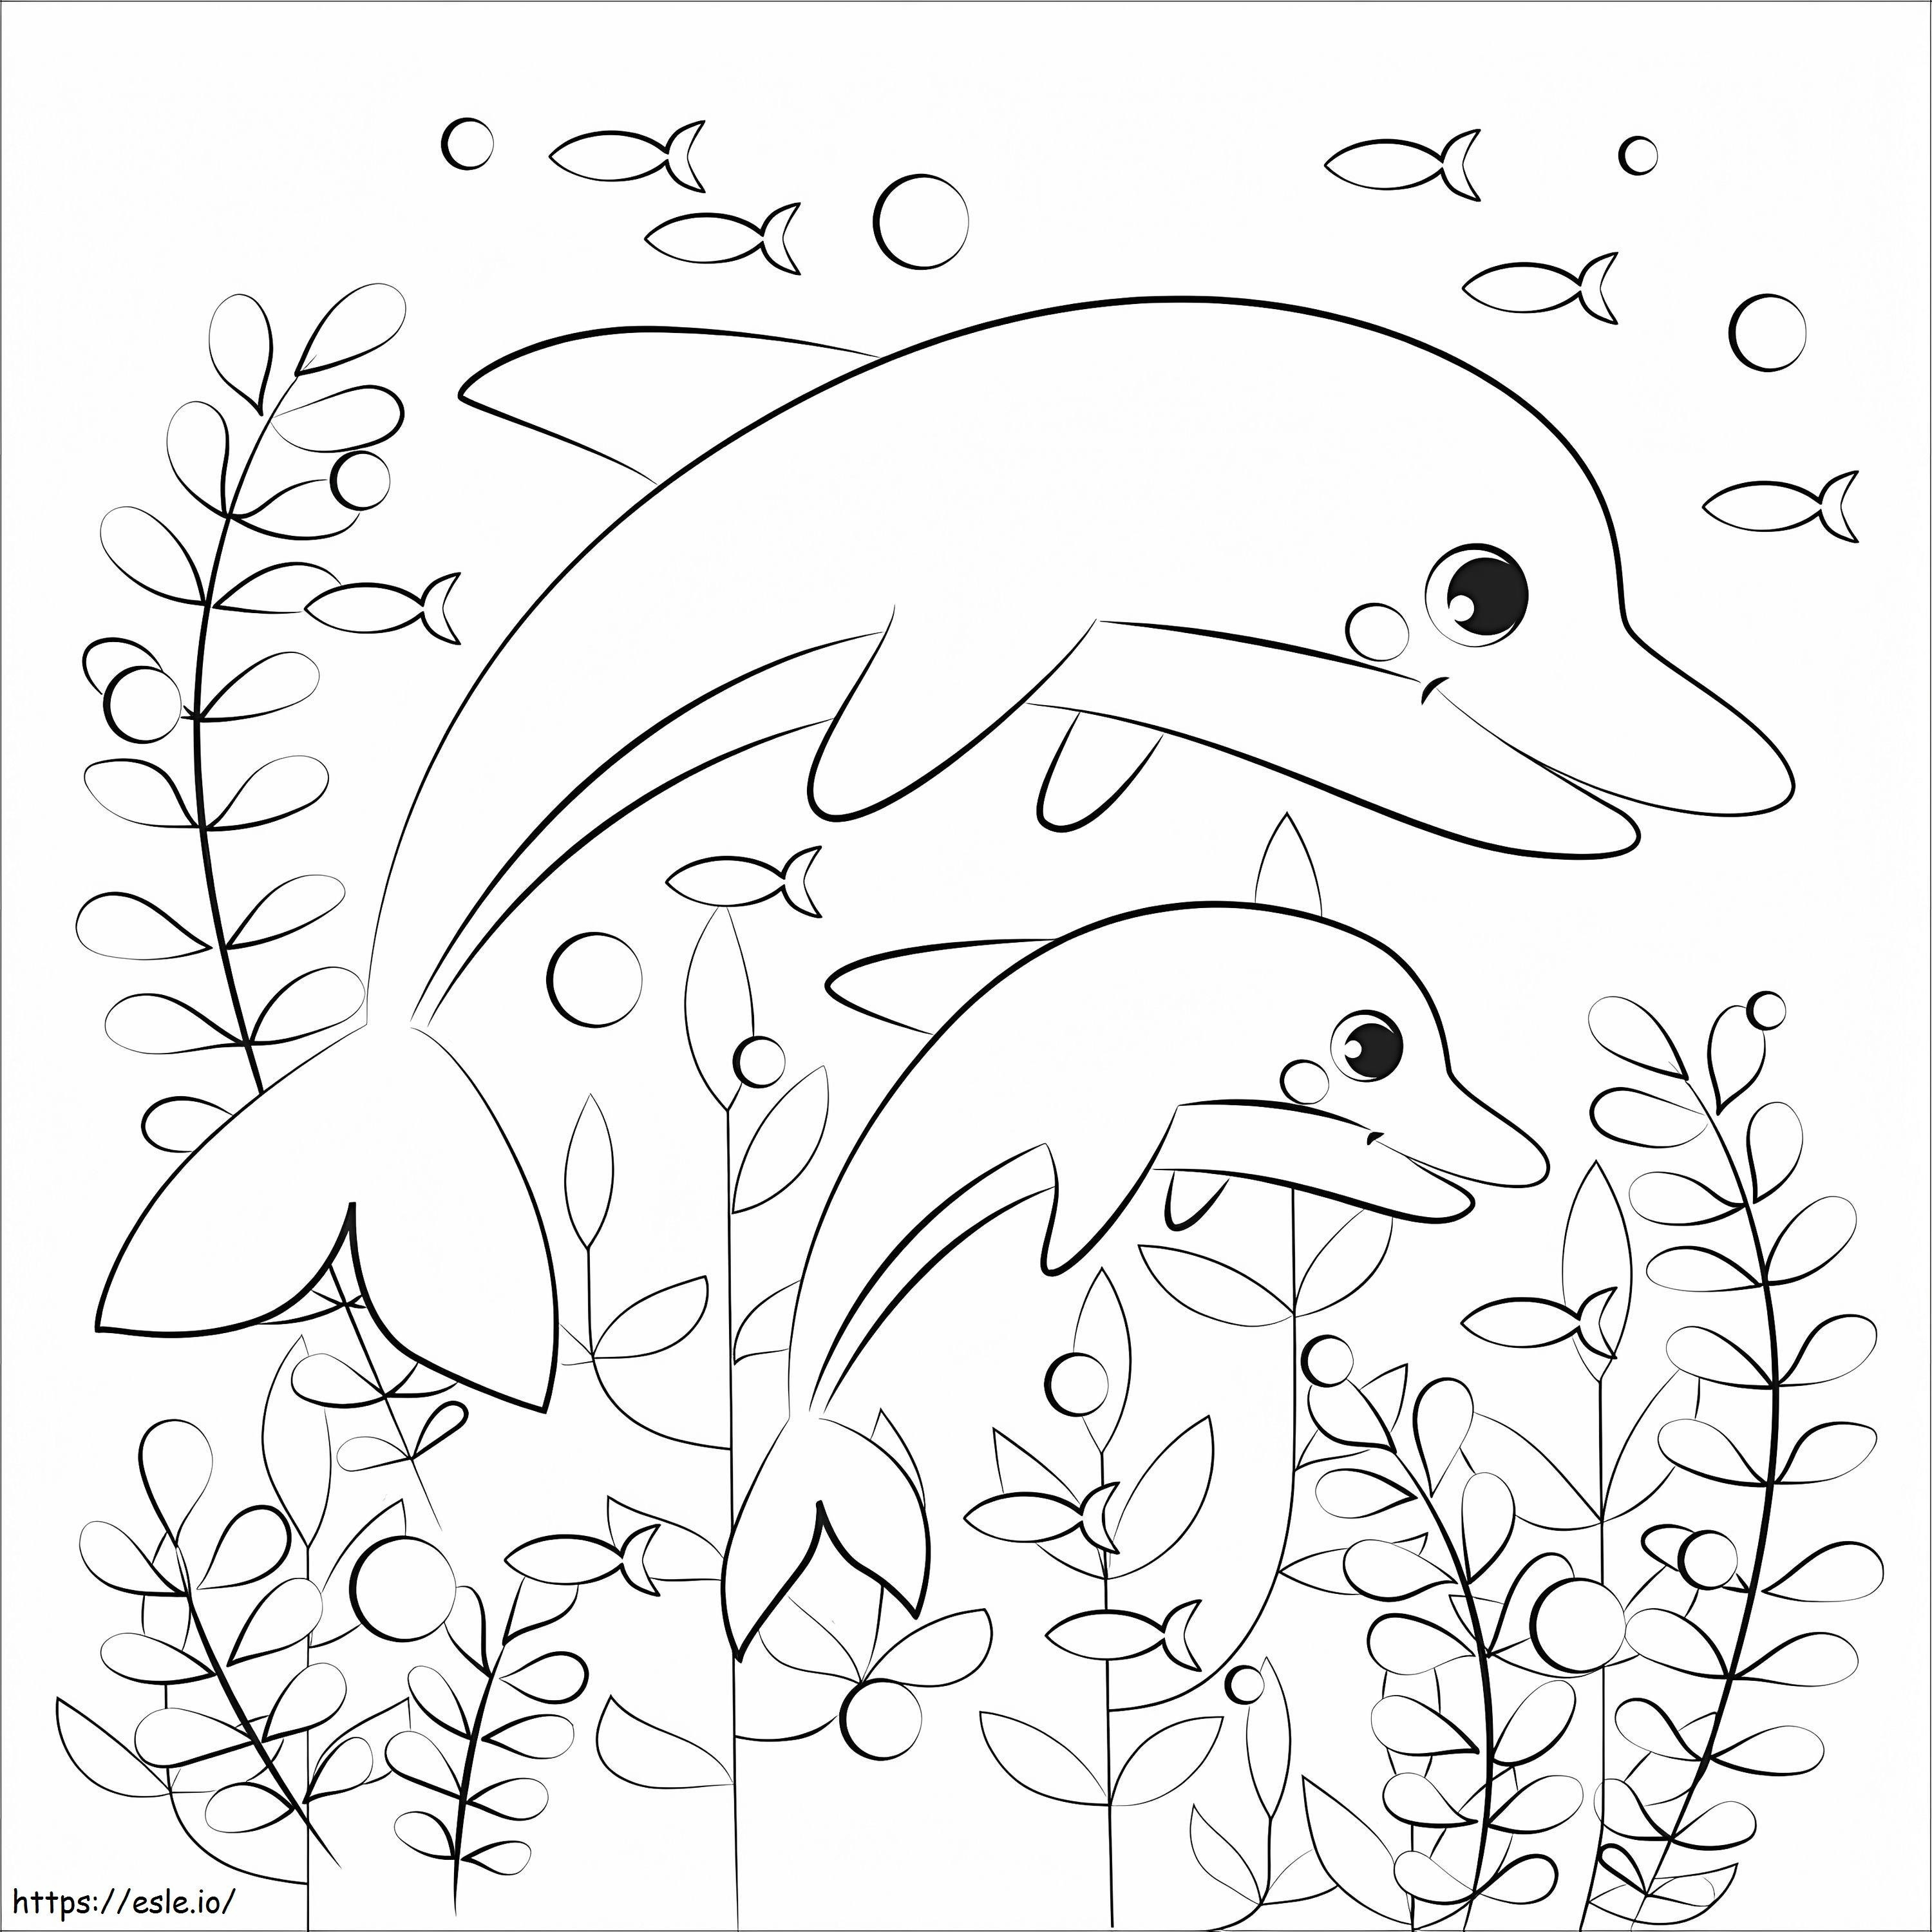 Lovely Dolphins coloring page